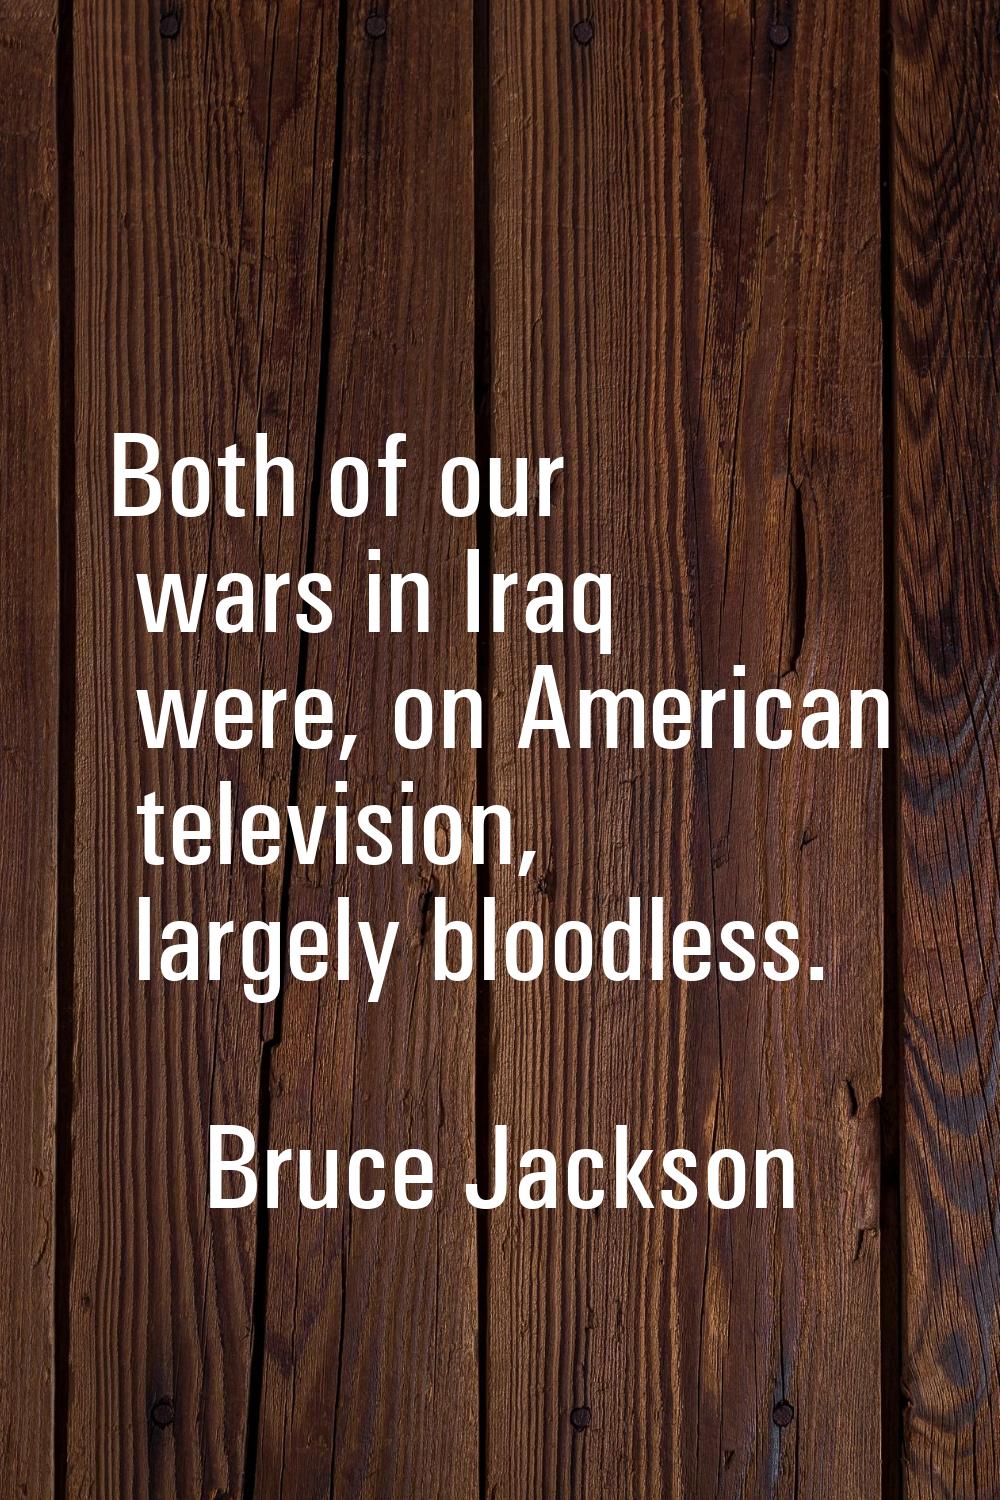 Both of our wars in Iraq were, on American television, largely bloodless.